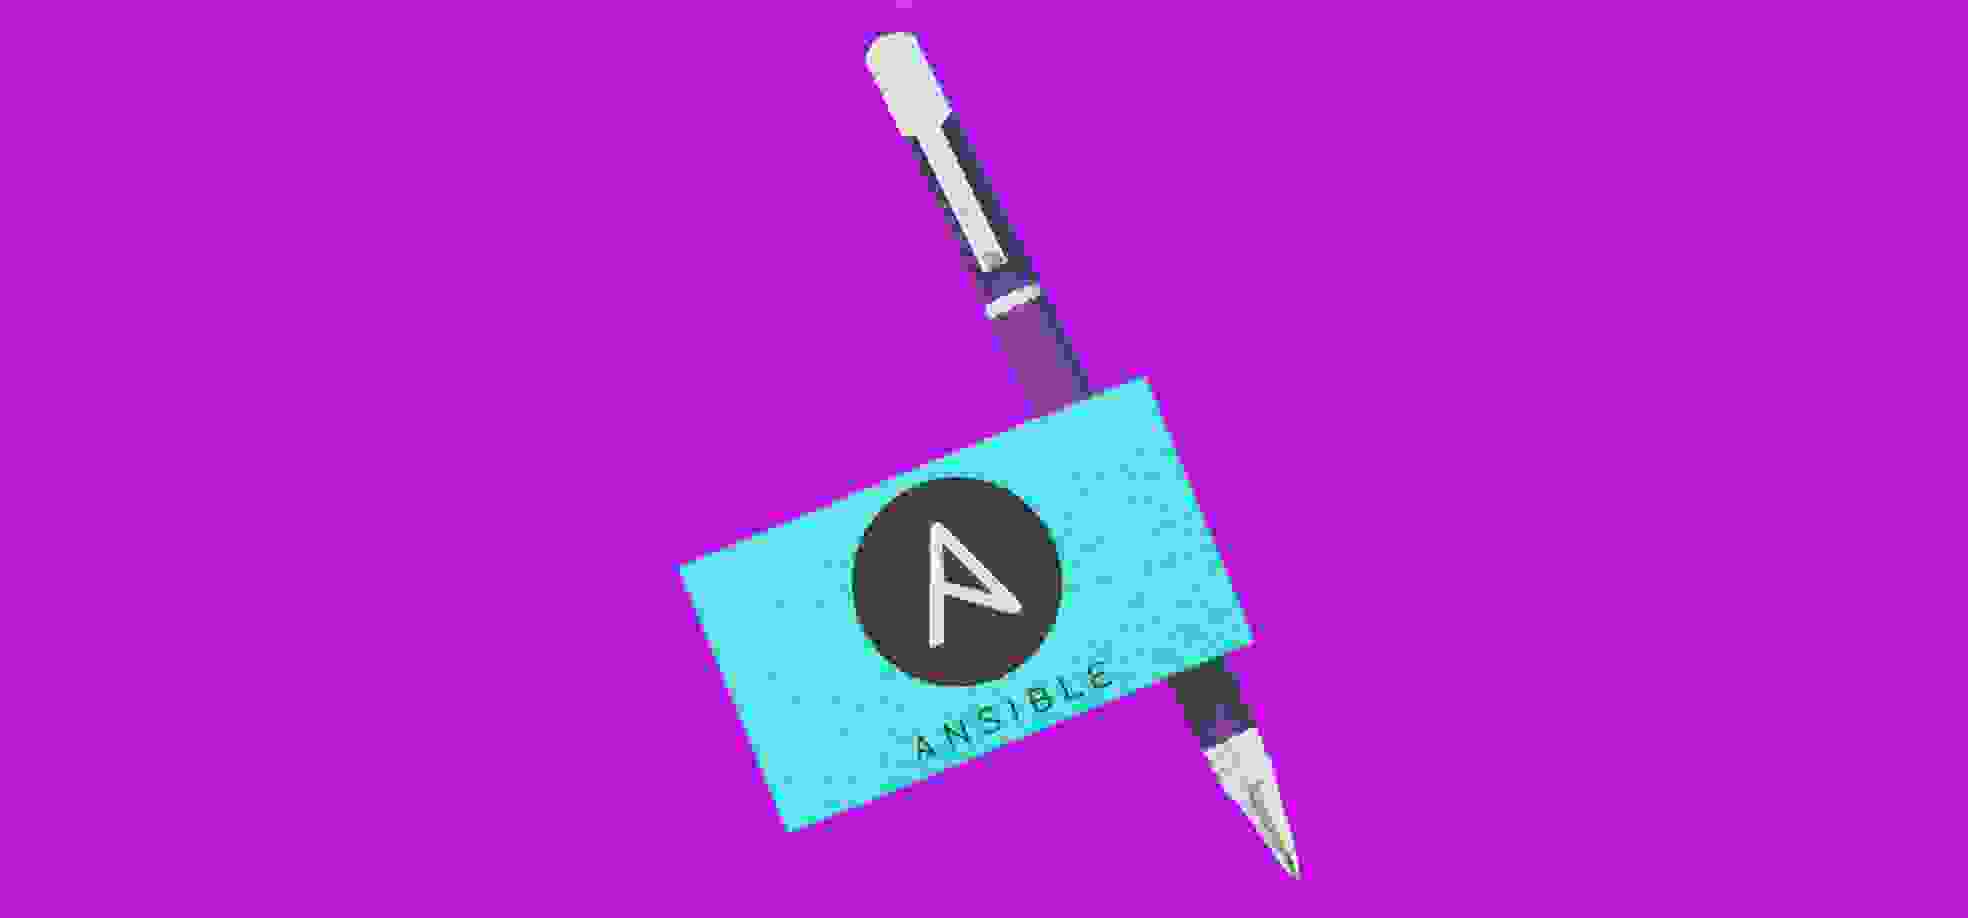 illustration of a pen on a purple background